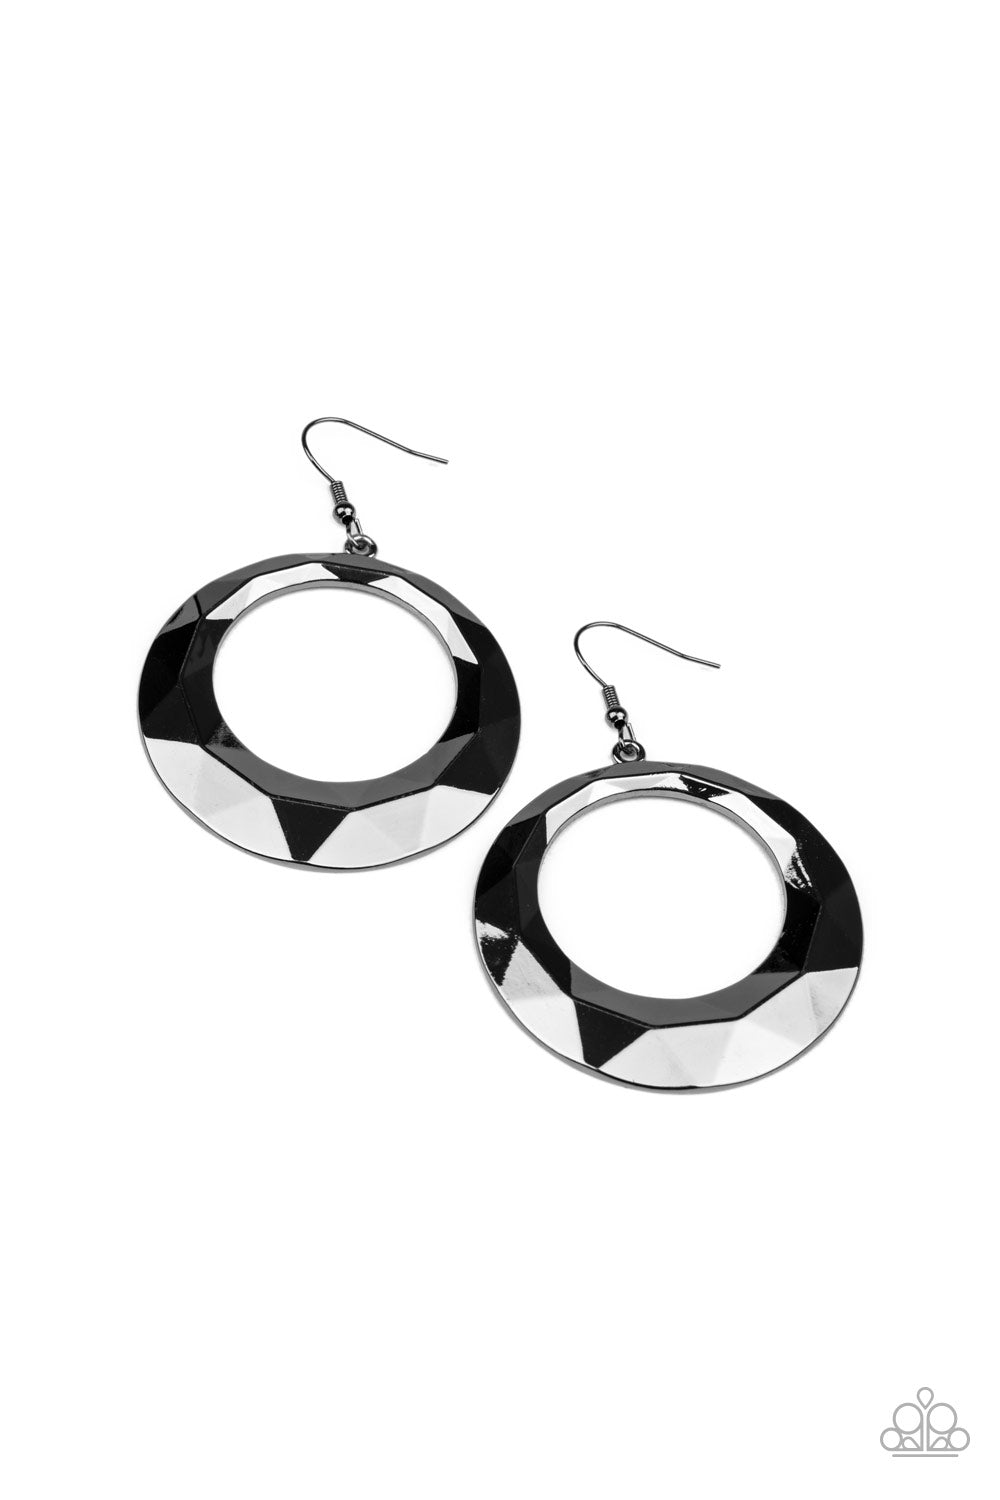 pittmanbling-and-jewelry-inc-presentsfiercely-faceted-black-earrings-paparazzi-accessories